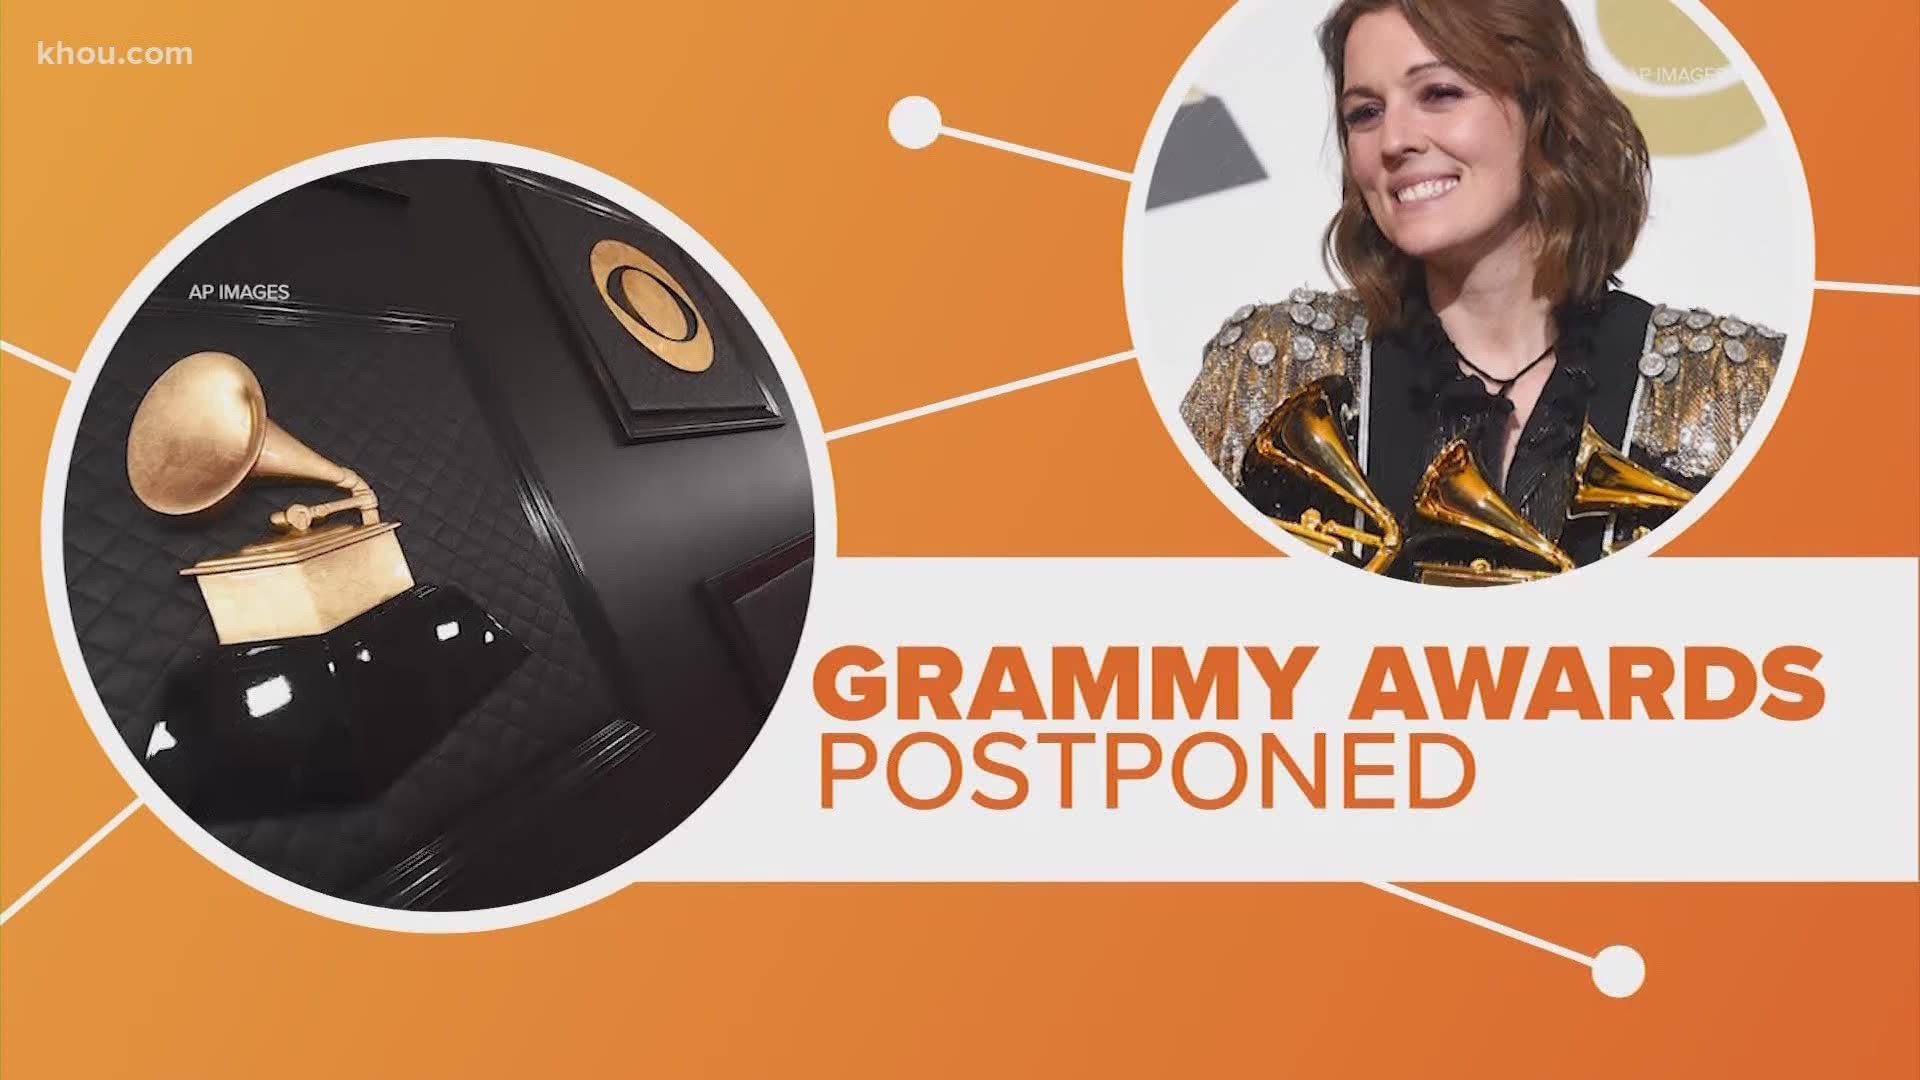 Grammy awards are postponed as Los Angeles is hit hard by the coronavirus pandemic.